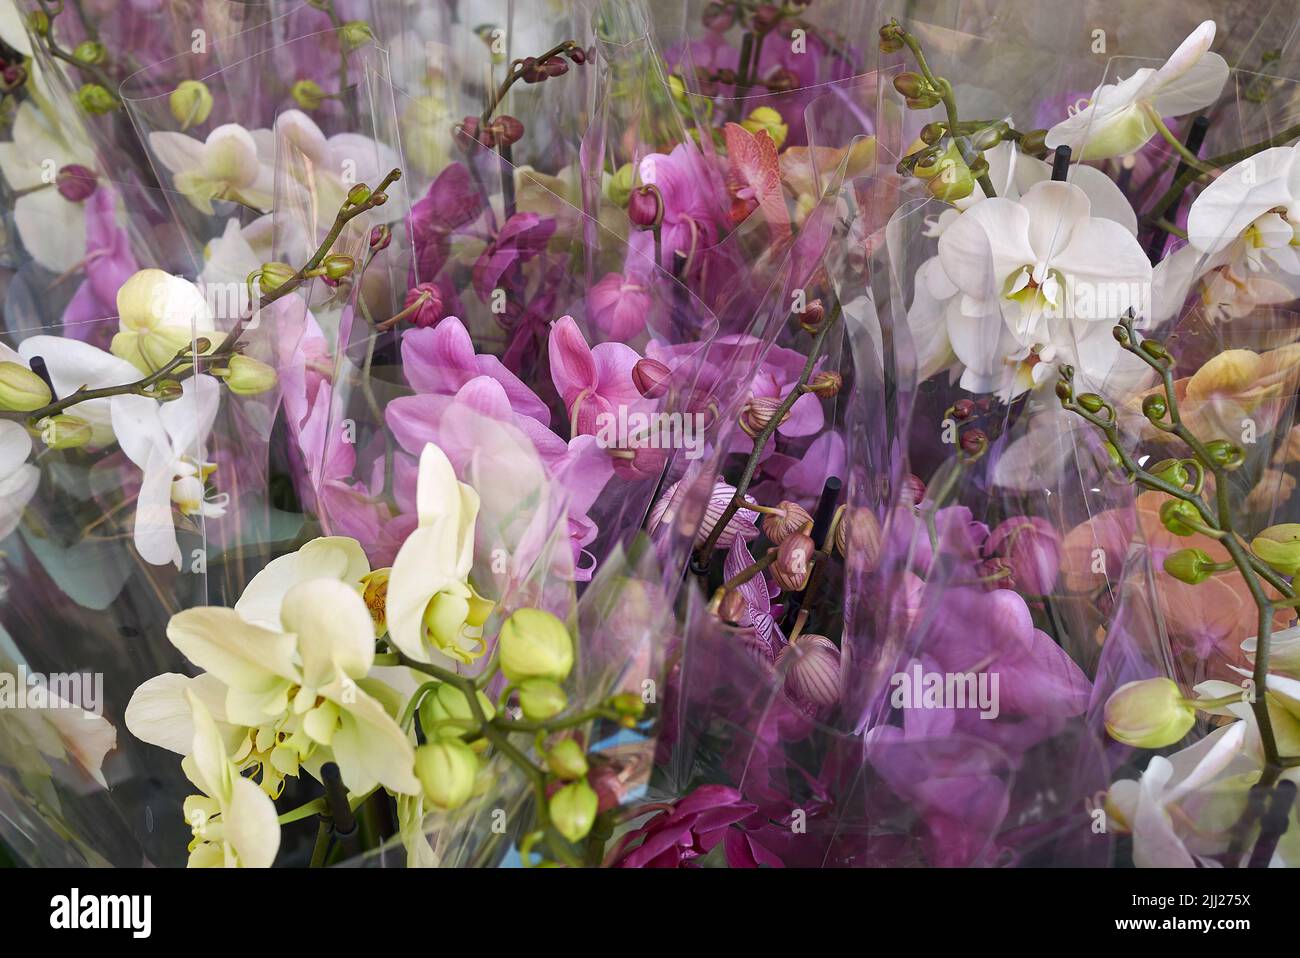 Phalaenopsis orchids in a flower market Stock Photo